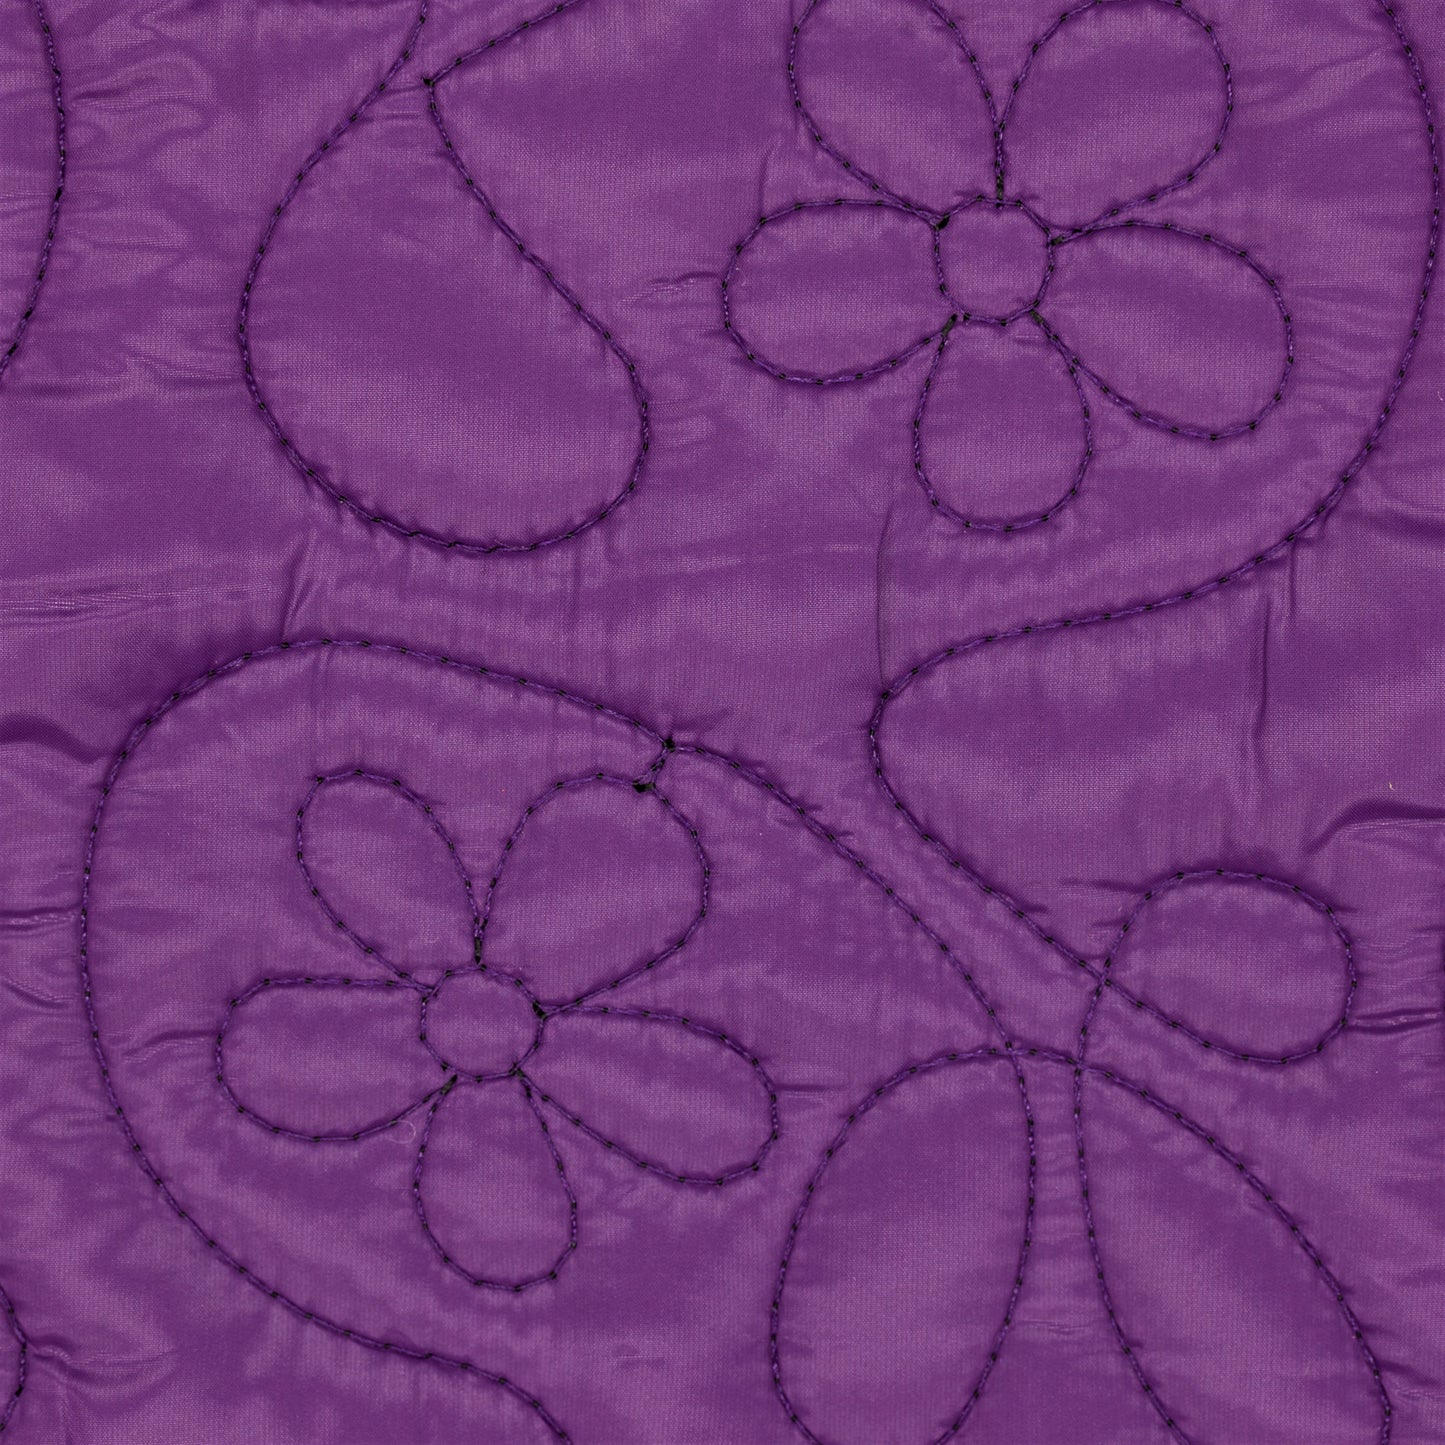 Embroidered Quilt Flowers, Purple - detail